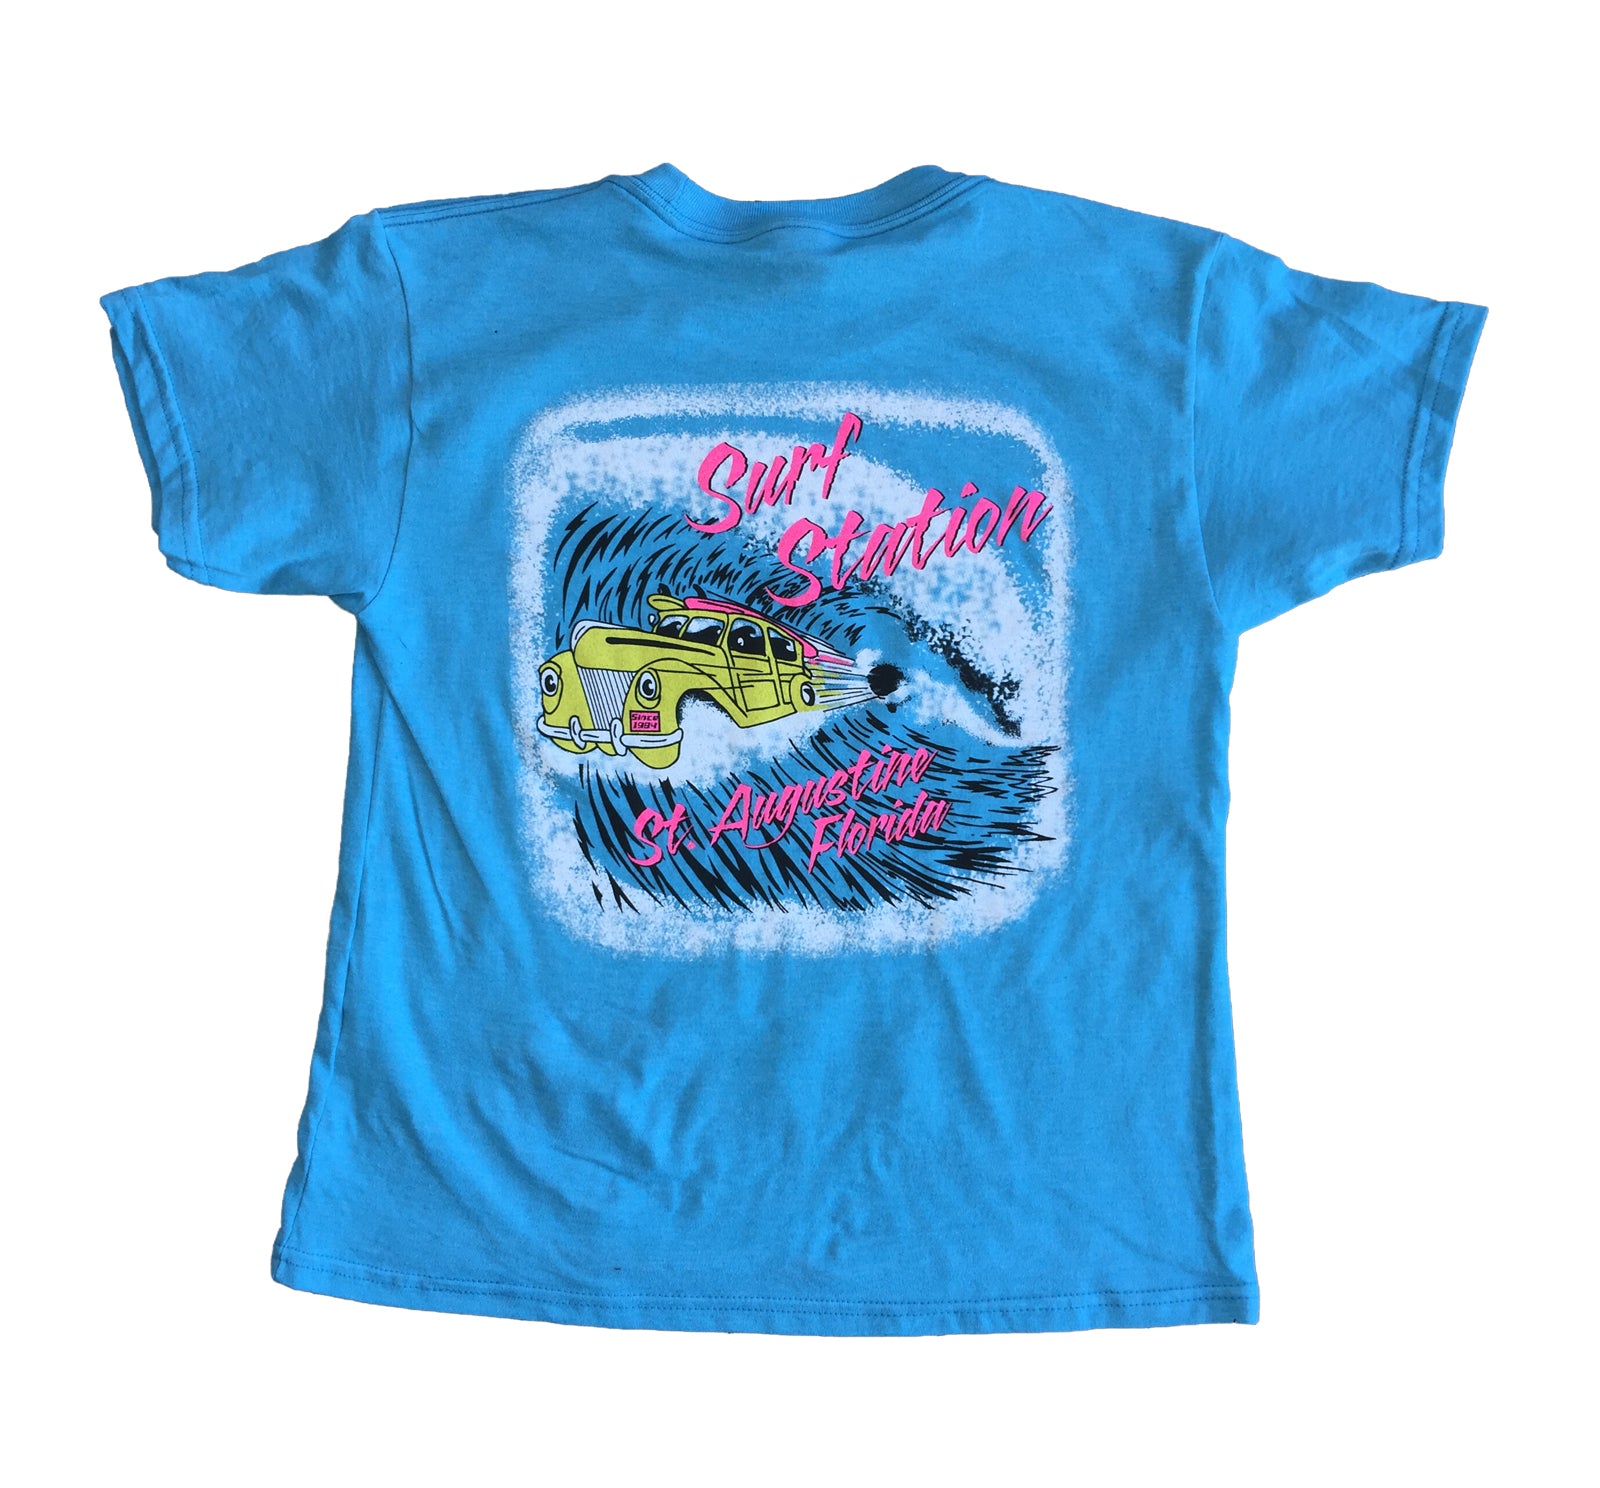 Surf Station Shooting Barrel Youth Boy's S/S T-Shirt